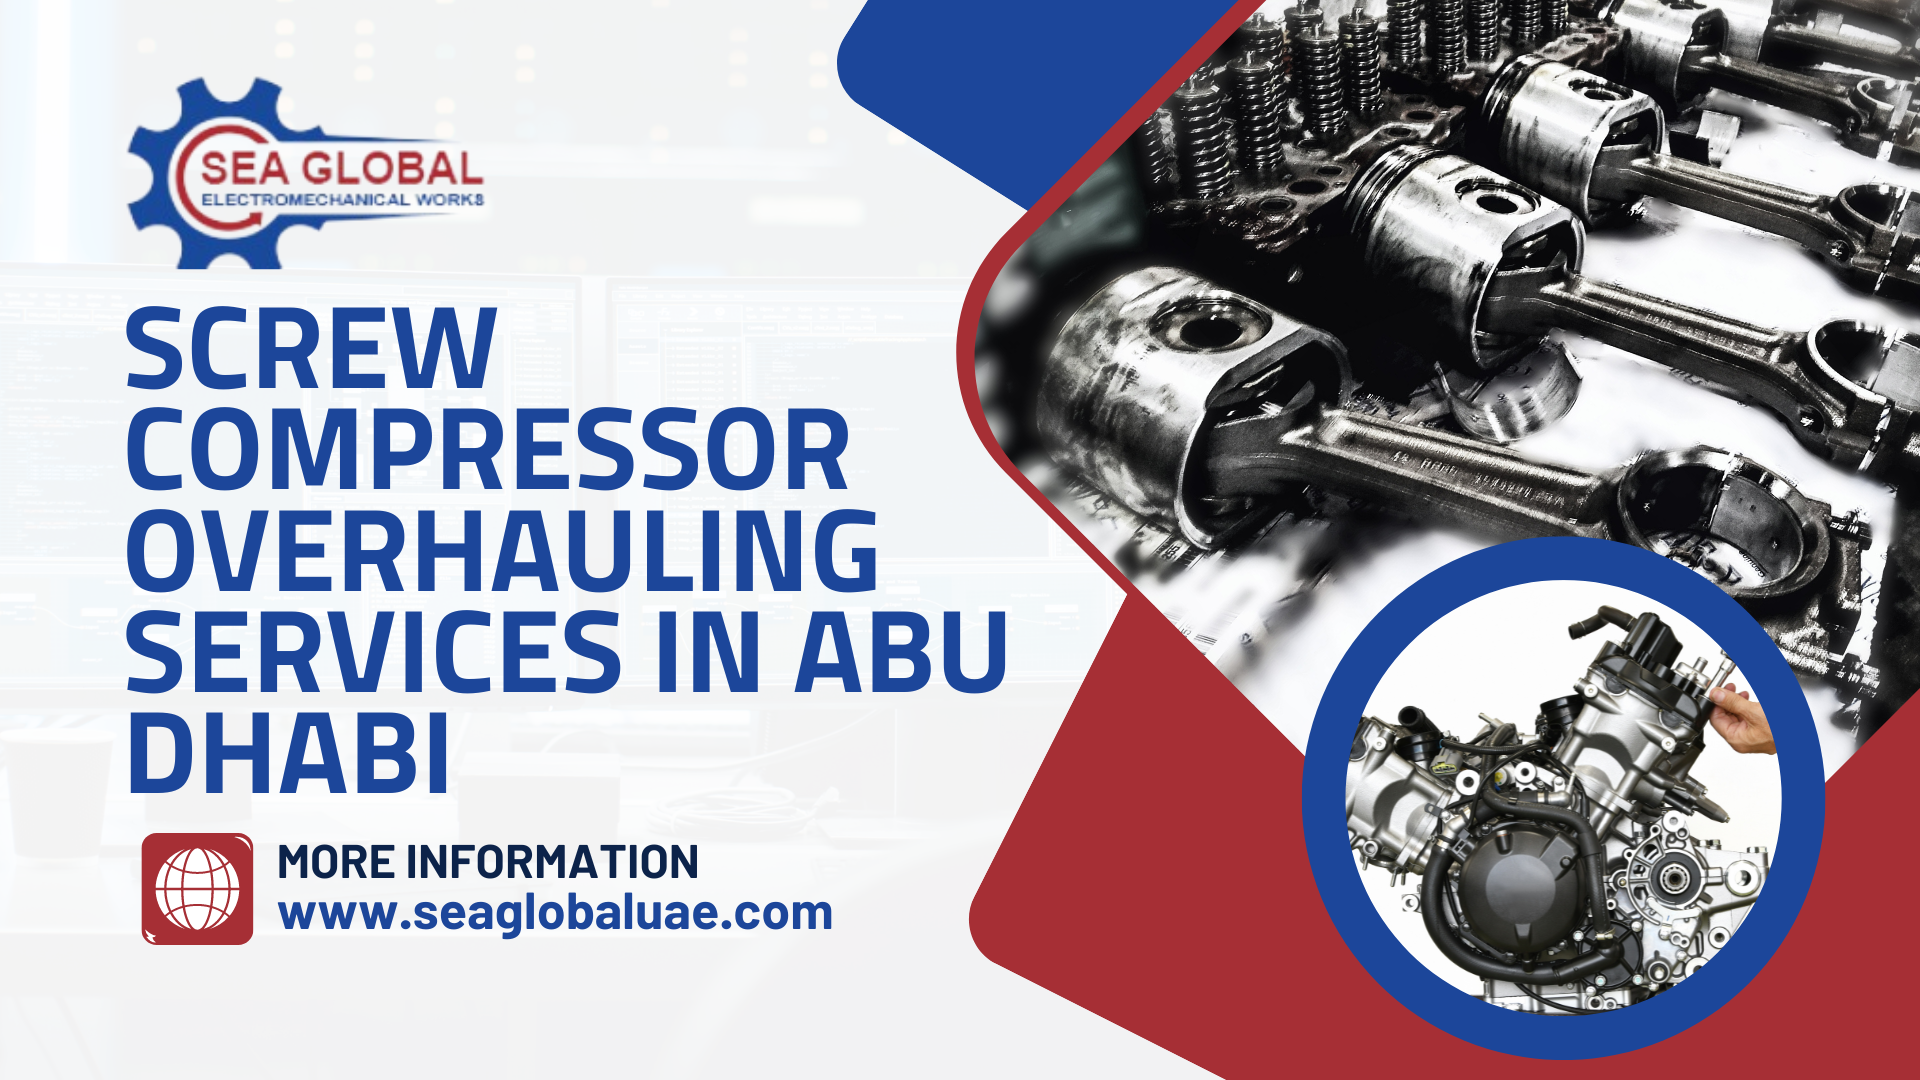 How to Choose the Right Provider for Screw Compressor Overhauling Services in Abu Dhabi?